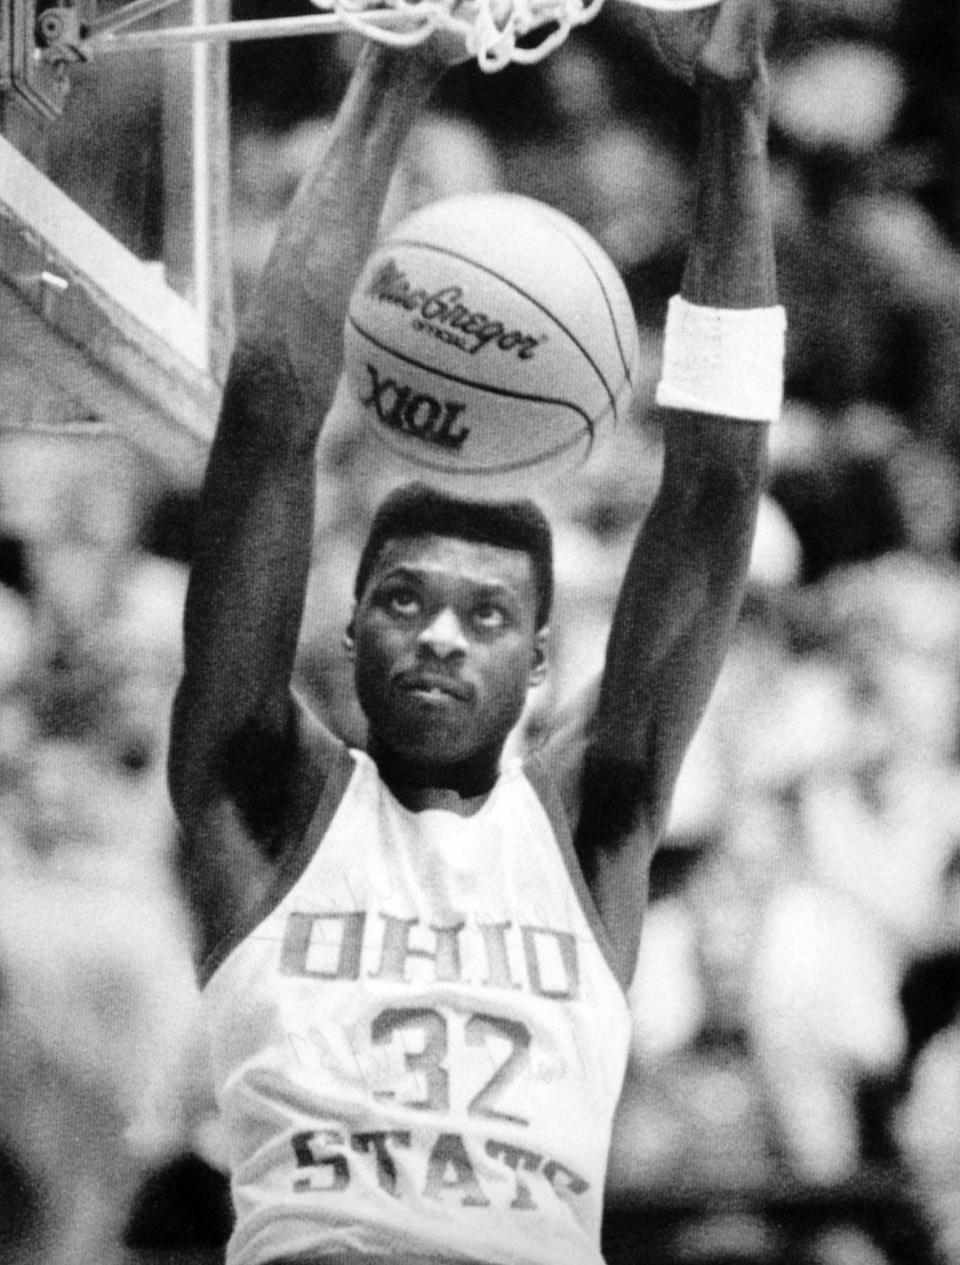 Dennis Hopson, shown in 1987 while playing for Ohio State, was a member of the Bulls&#8217; first championship team during the Michael Jordan era.